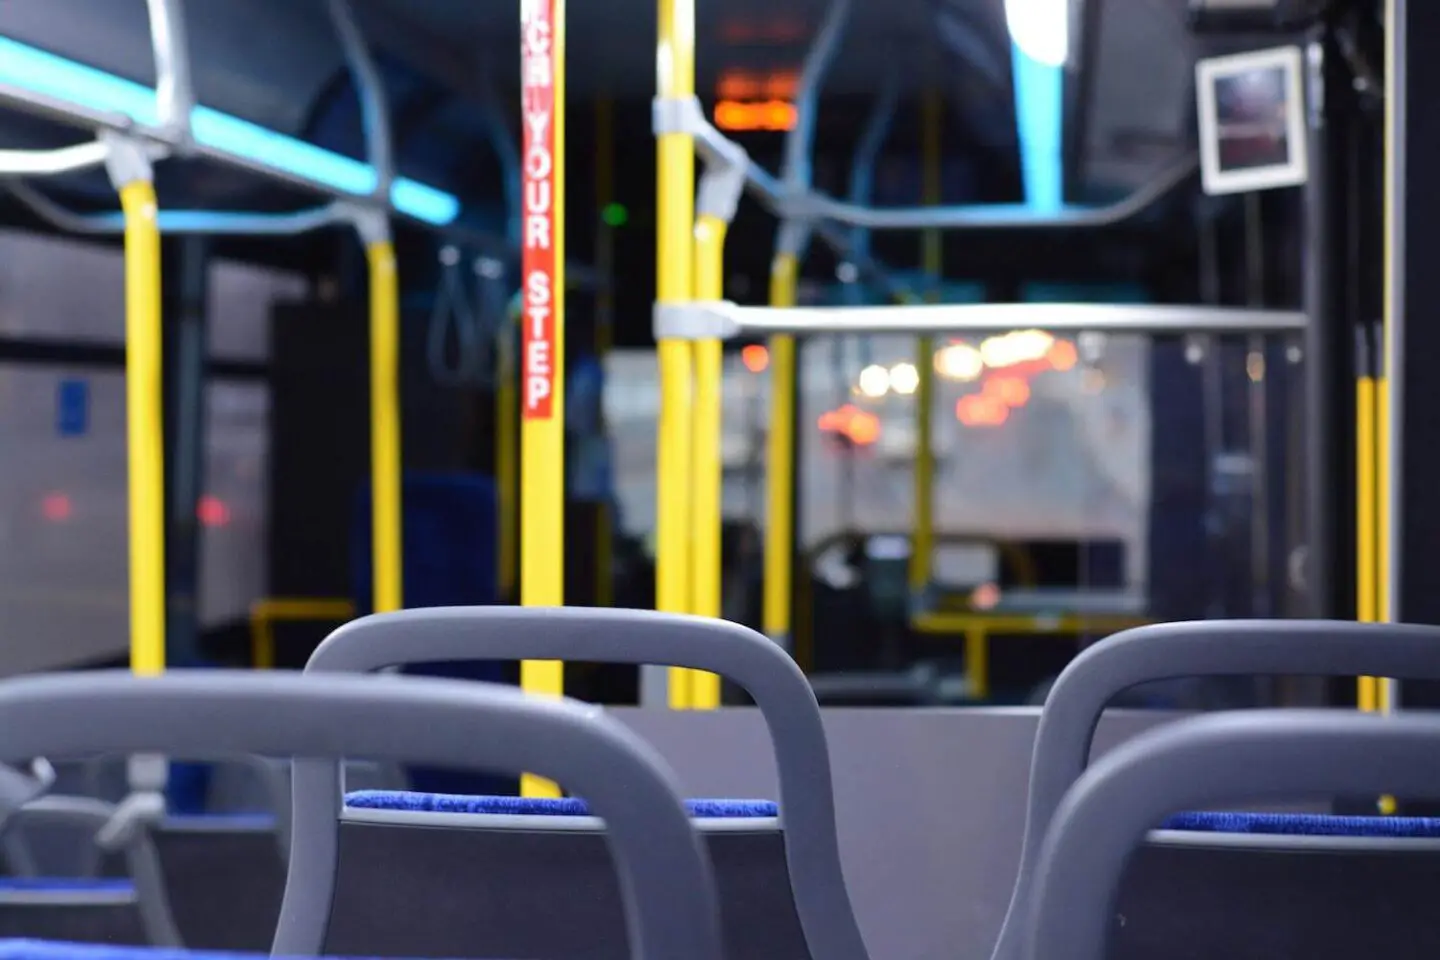 Seats on a bus at night